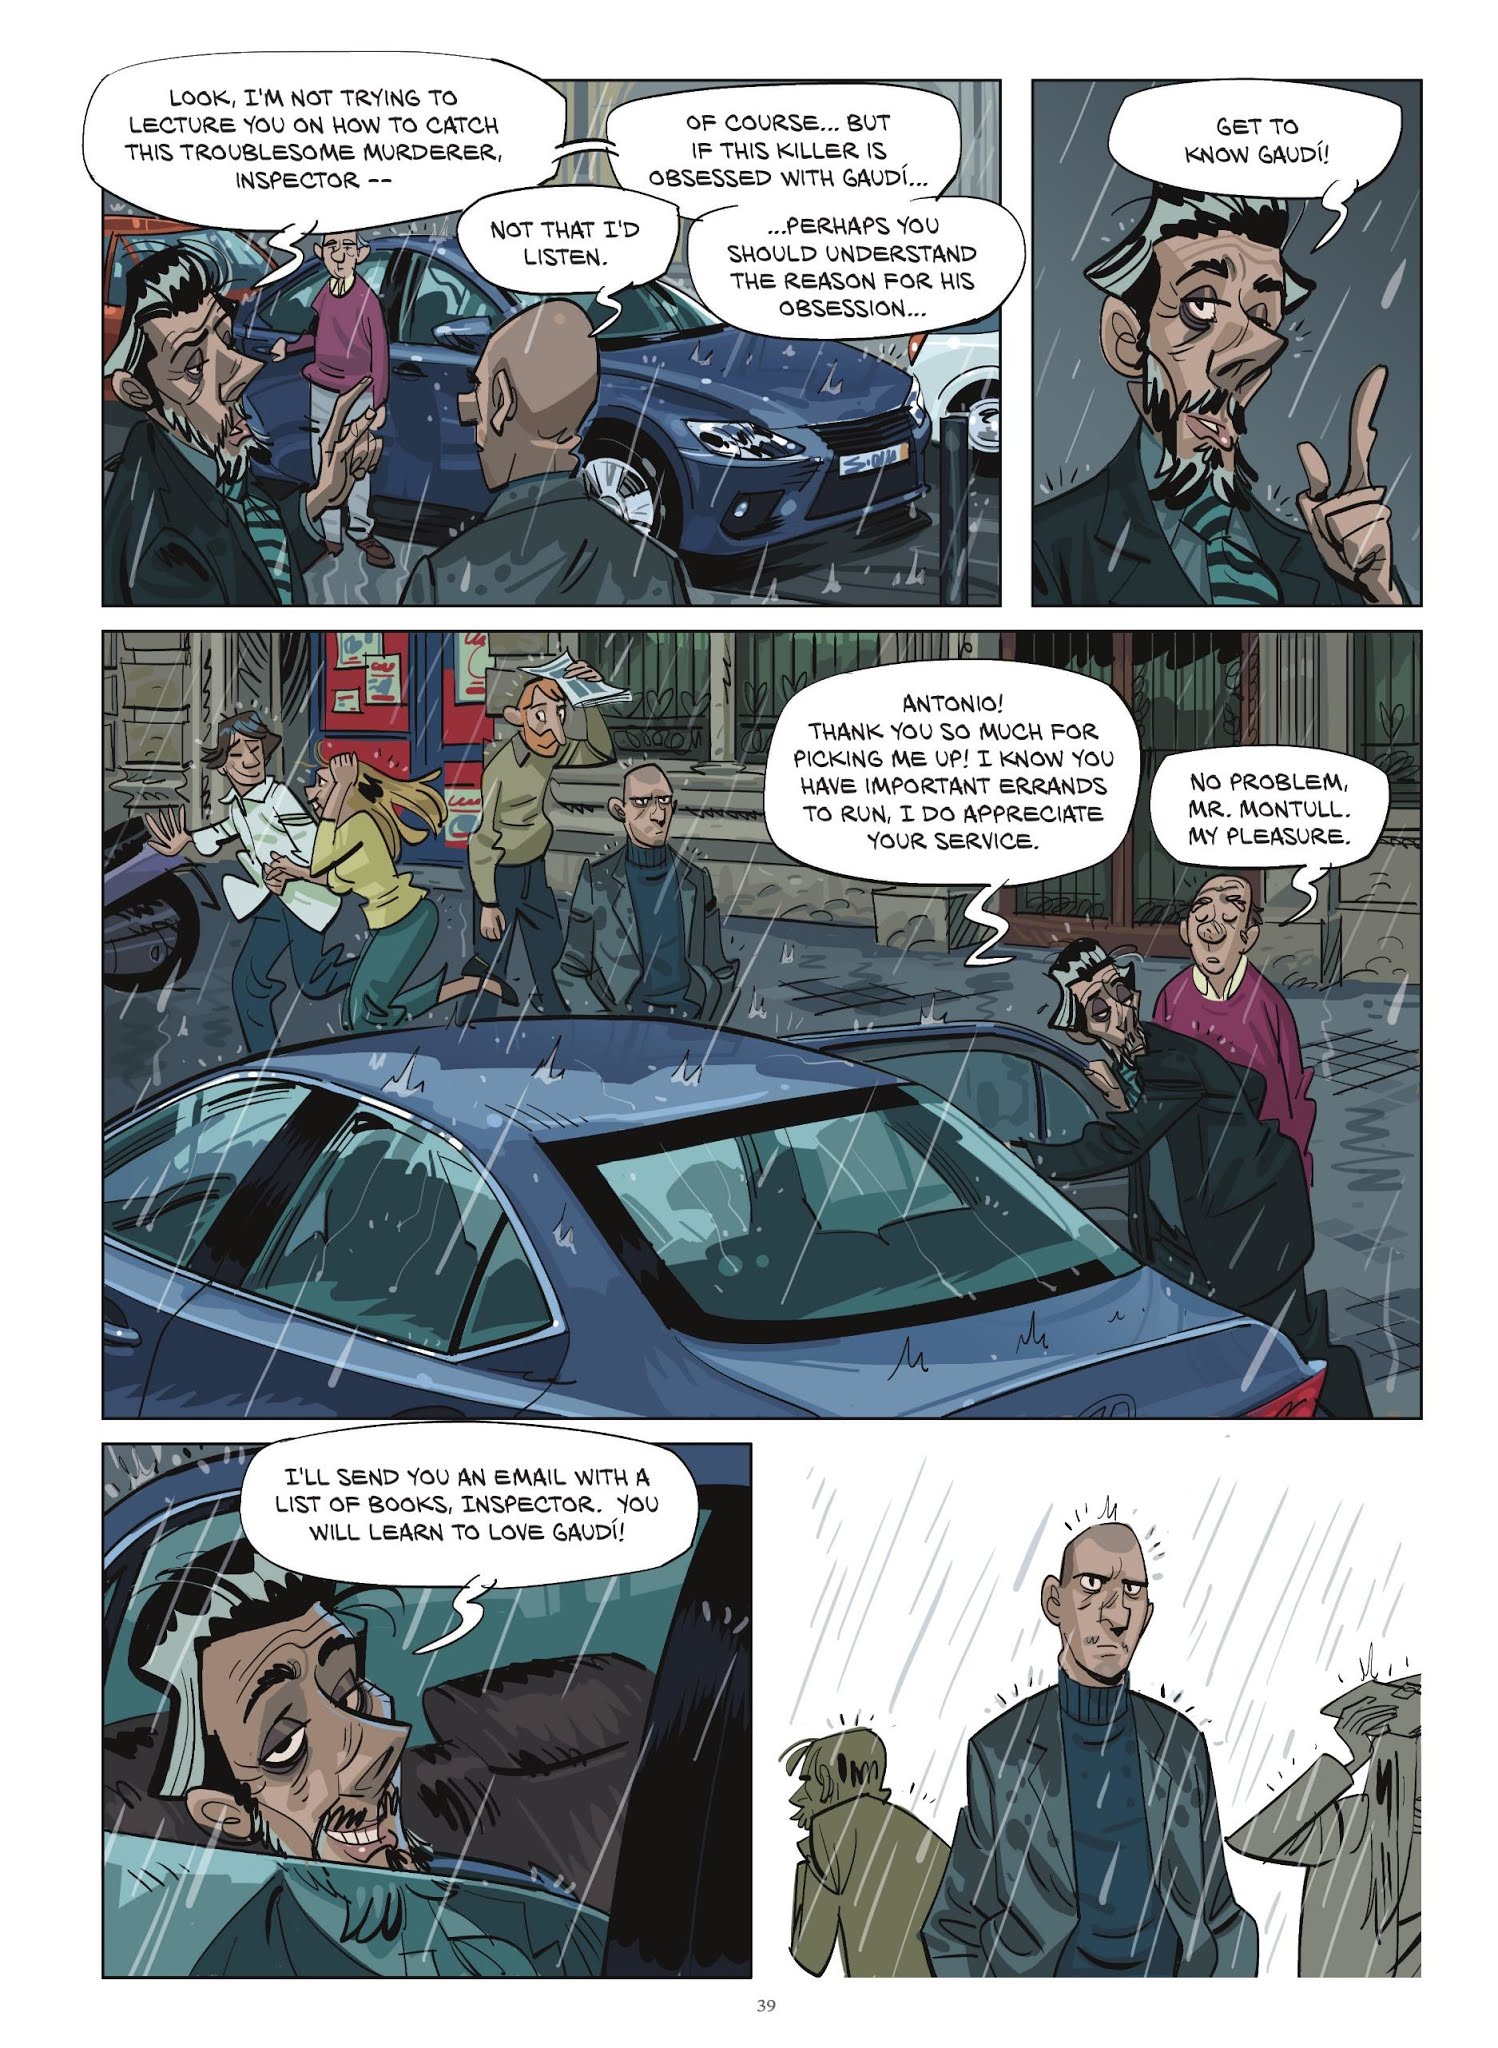 Read online The Ghost of Gaudi comic -  Issue # TPB - 39